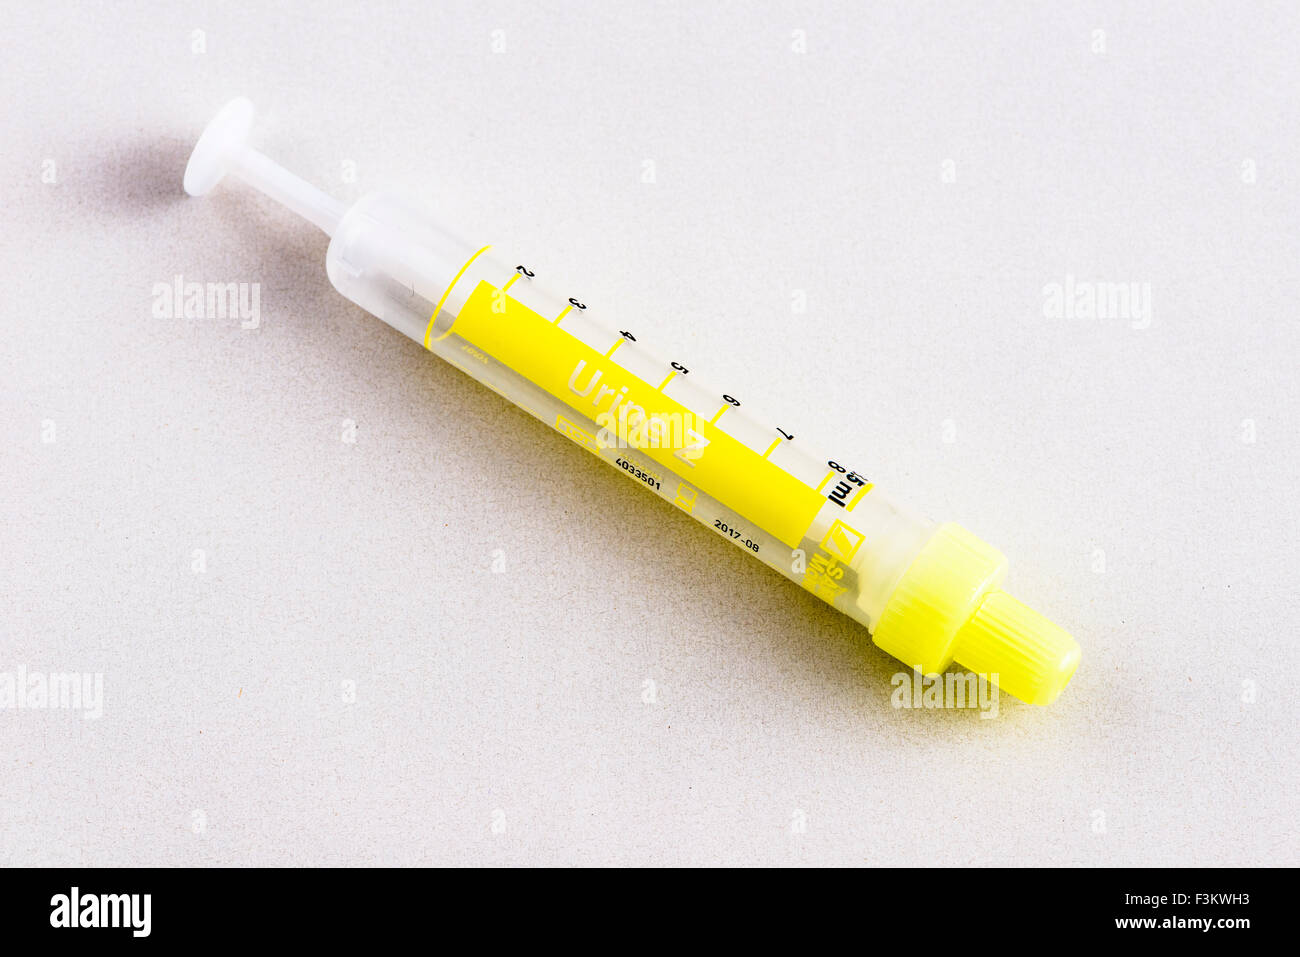 A yellow pharmaceutical phial for medical use, displayed on a white table Stock Photo